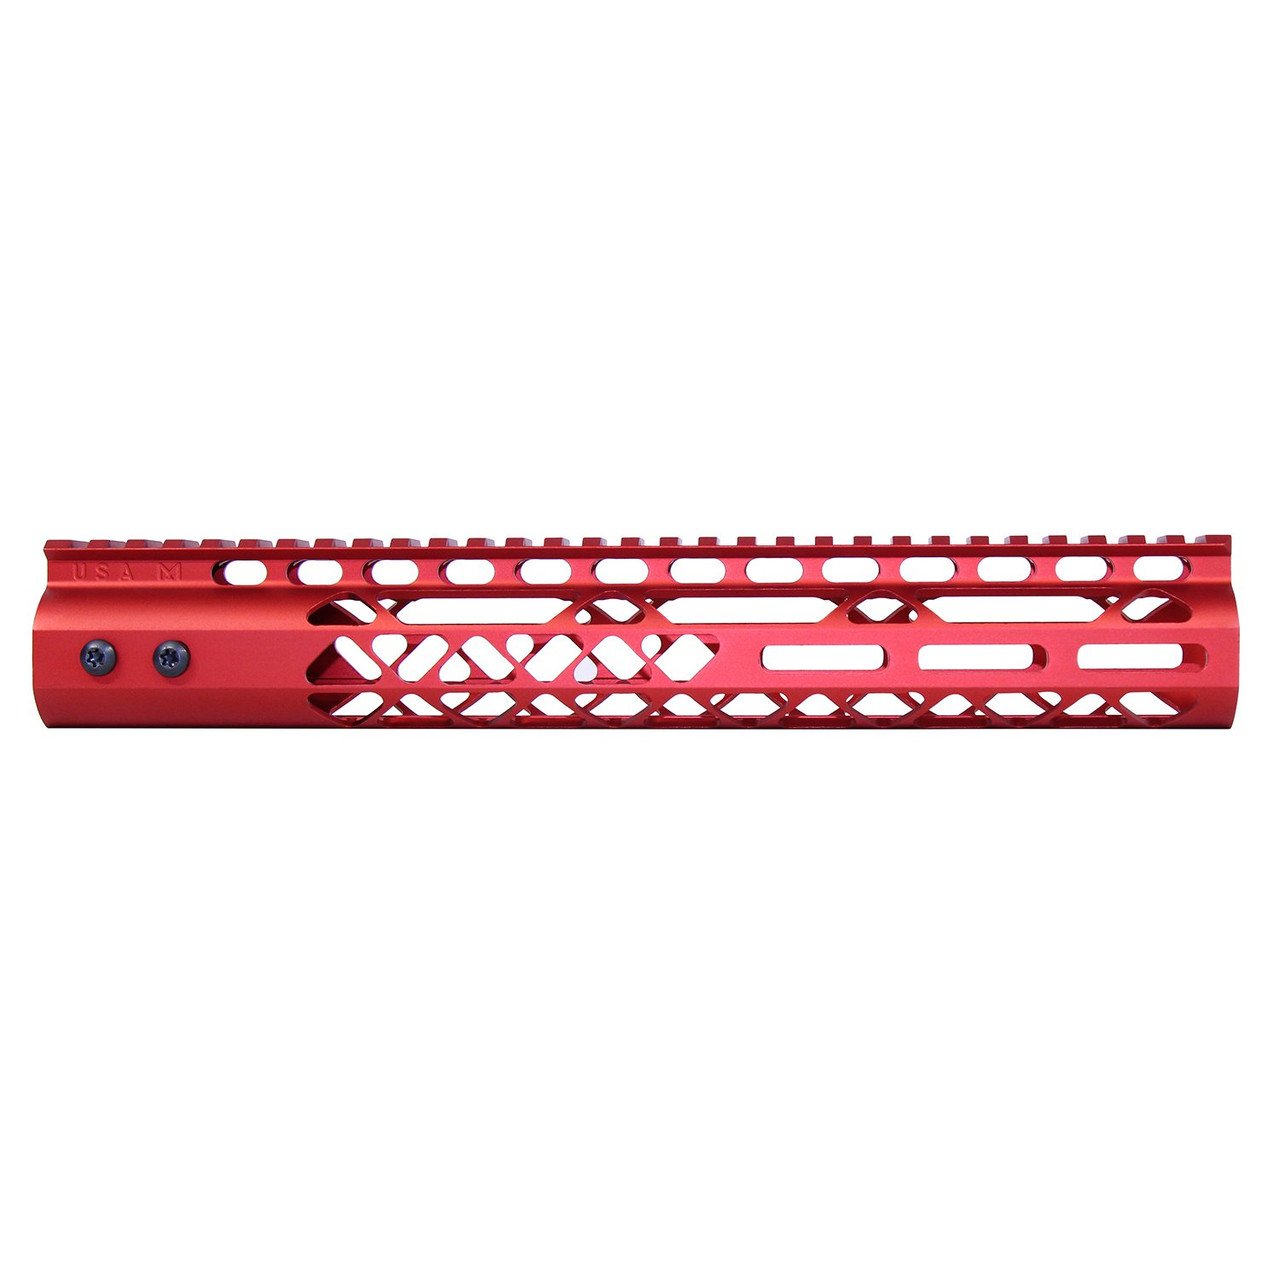 Guntec USA GT-12MLK-AL-RED 12" Air Lite M-LOK Free Floating Handguard With Monolithic Top Rail (Anodized Red)